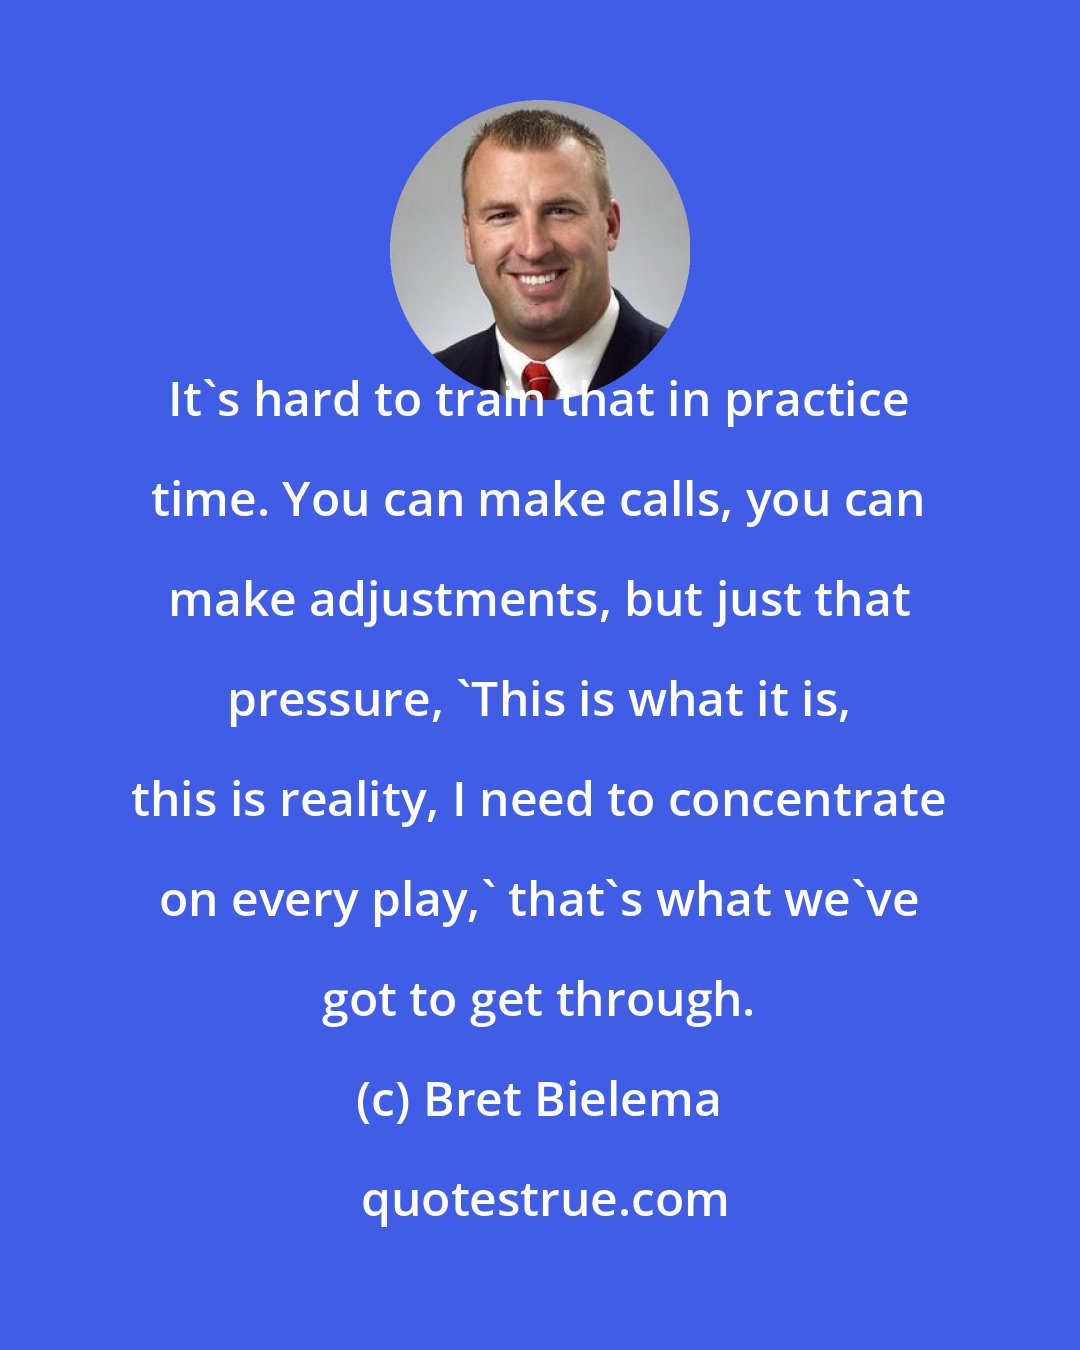 Bret Bielema: It's hard to train that in practice time. You can make calls, you can make adjustments, but just that pressure, 'This is what it is, this is reality, I need to concentrate on every play,' that's what we've got to get through.